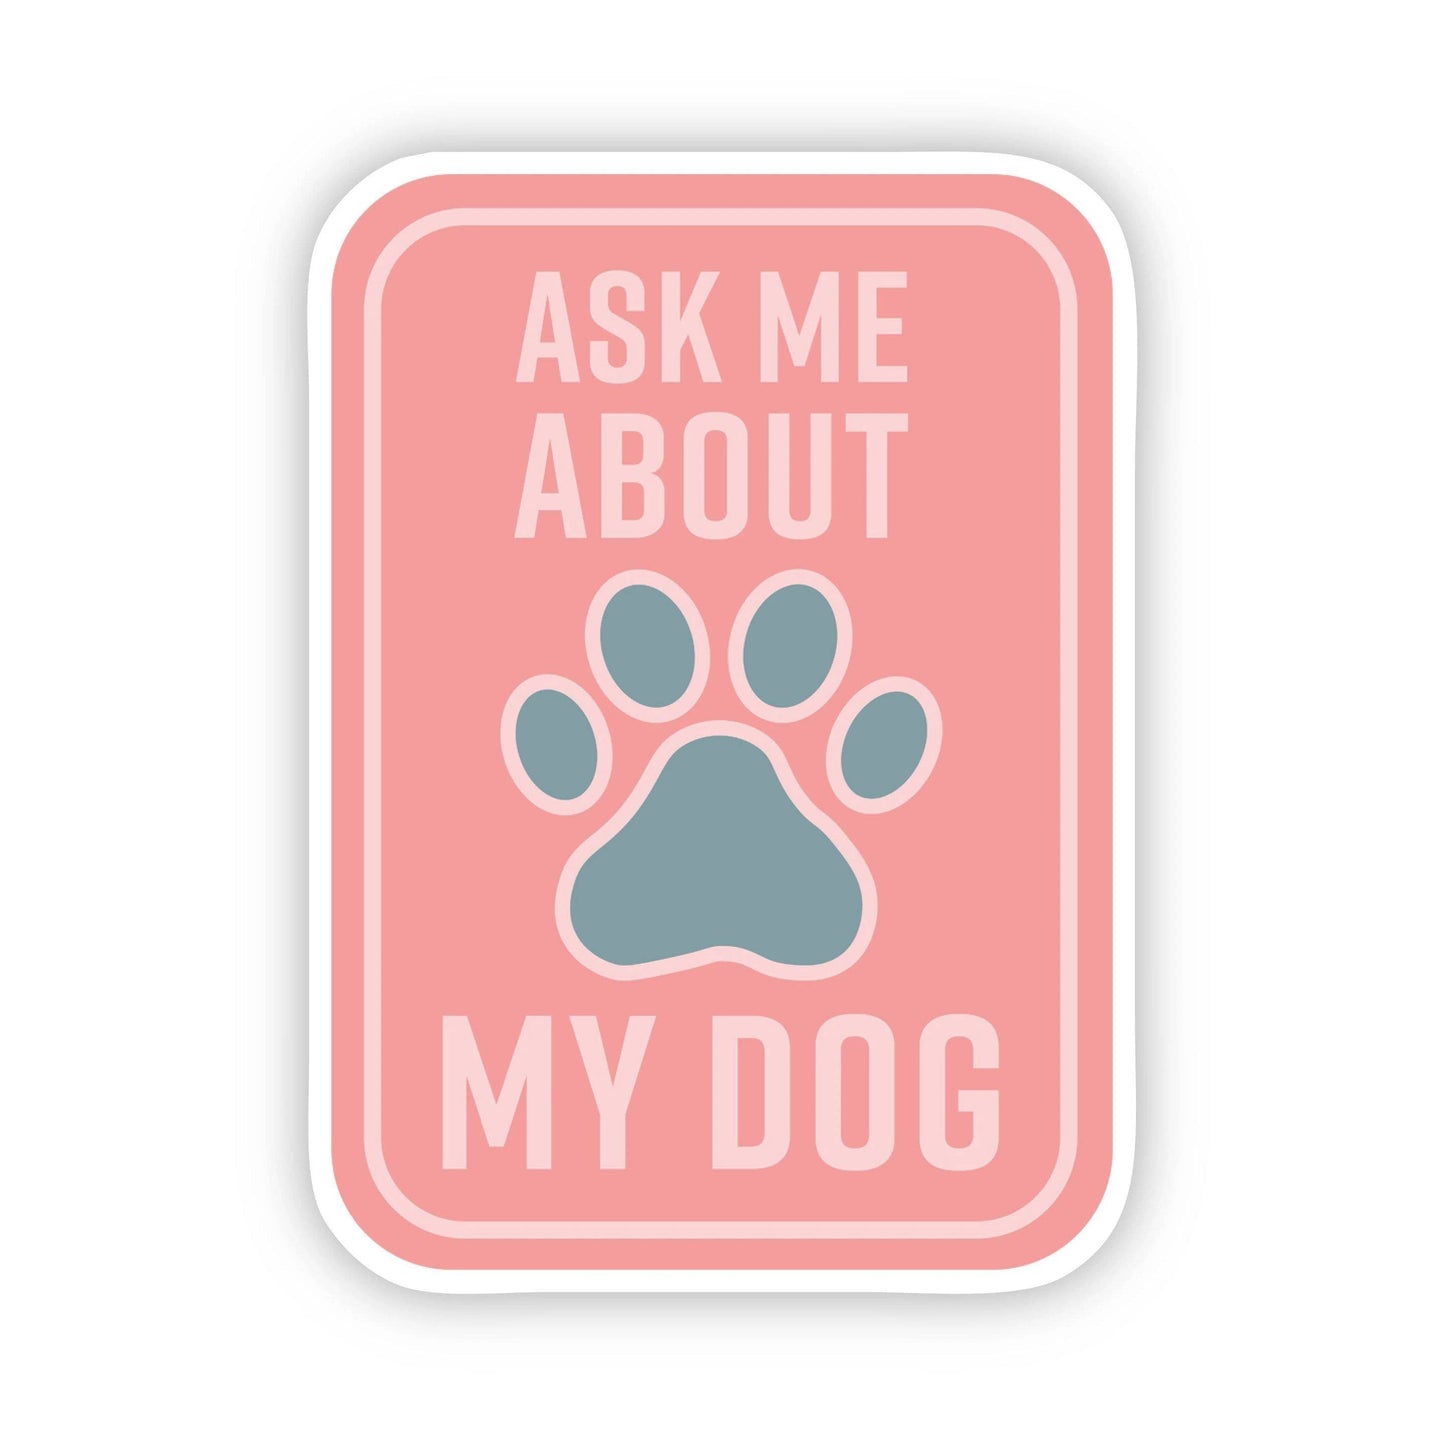 Ask Me About my Dog sticker pink, by Big Moods